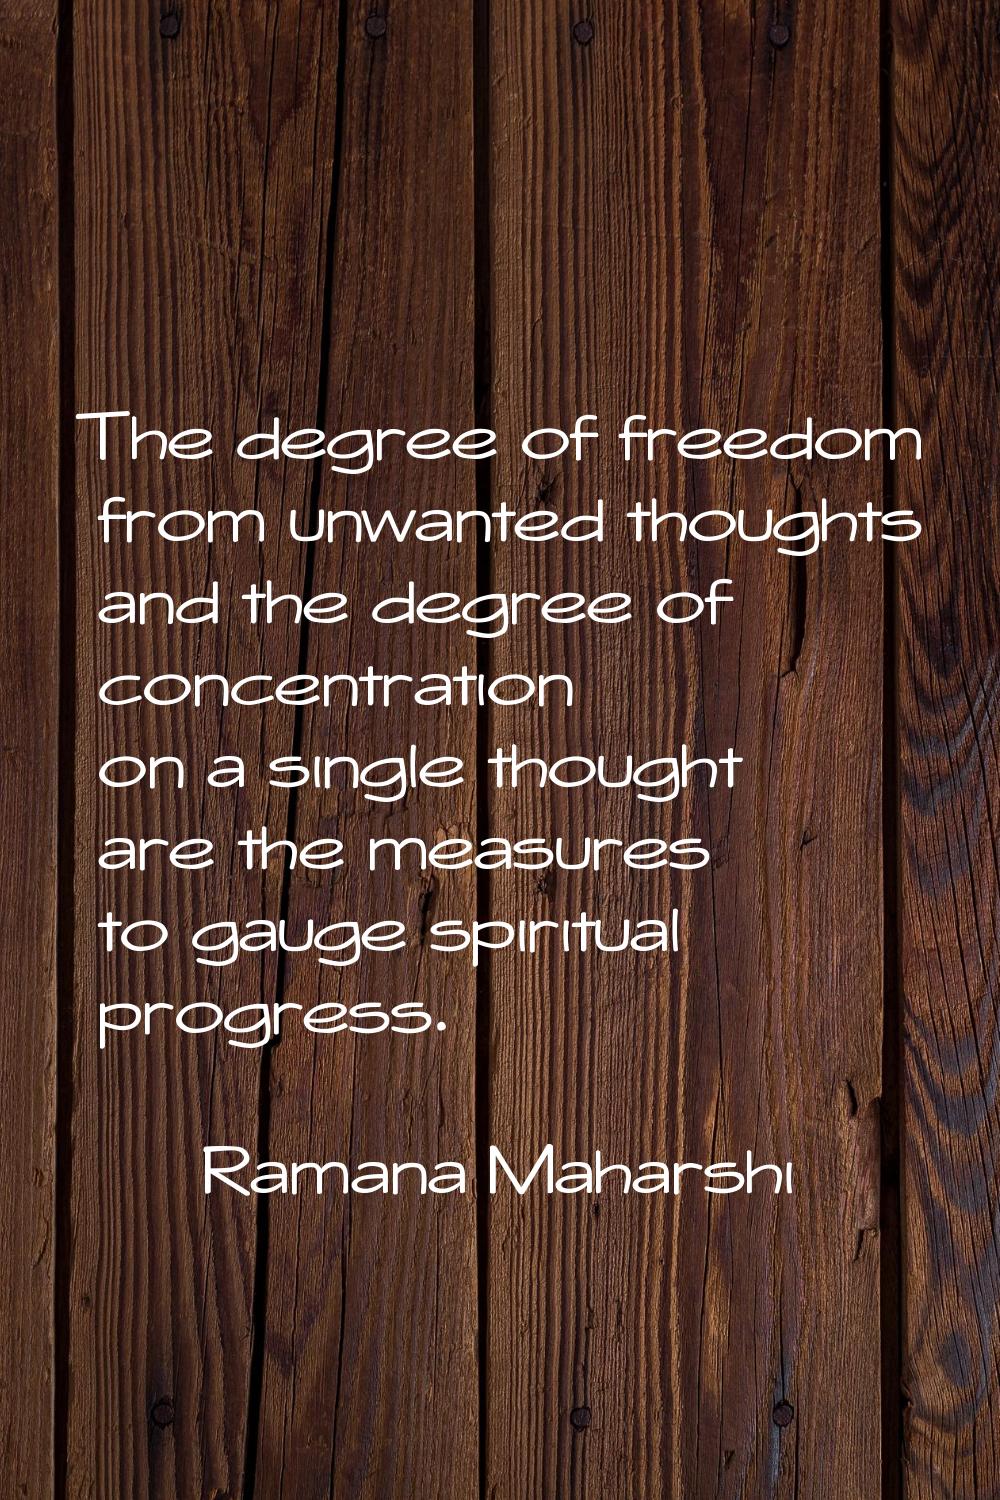 The degree of freedom from unwanted thoughts and the degree of concentration on a single thought ar